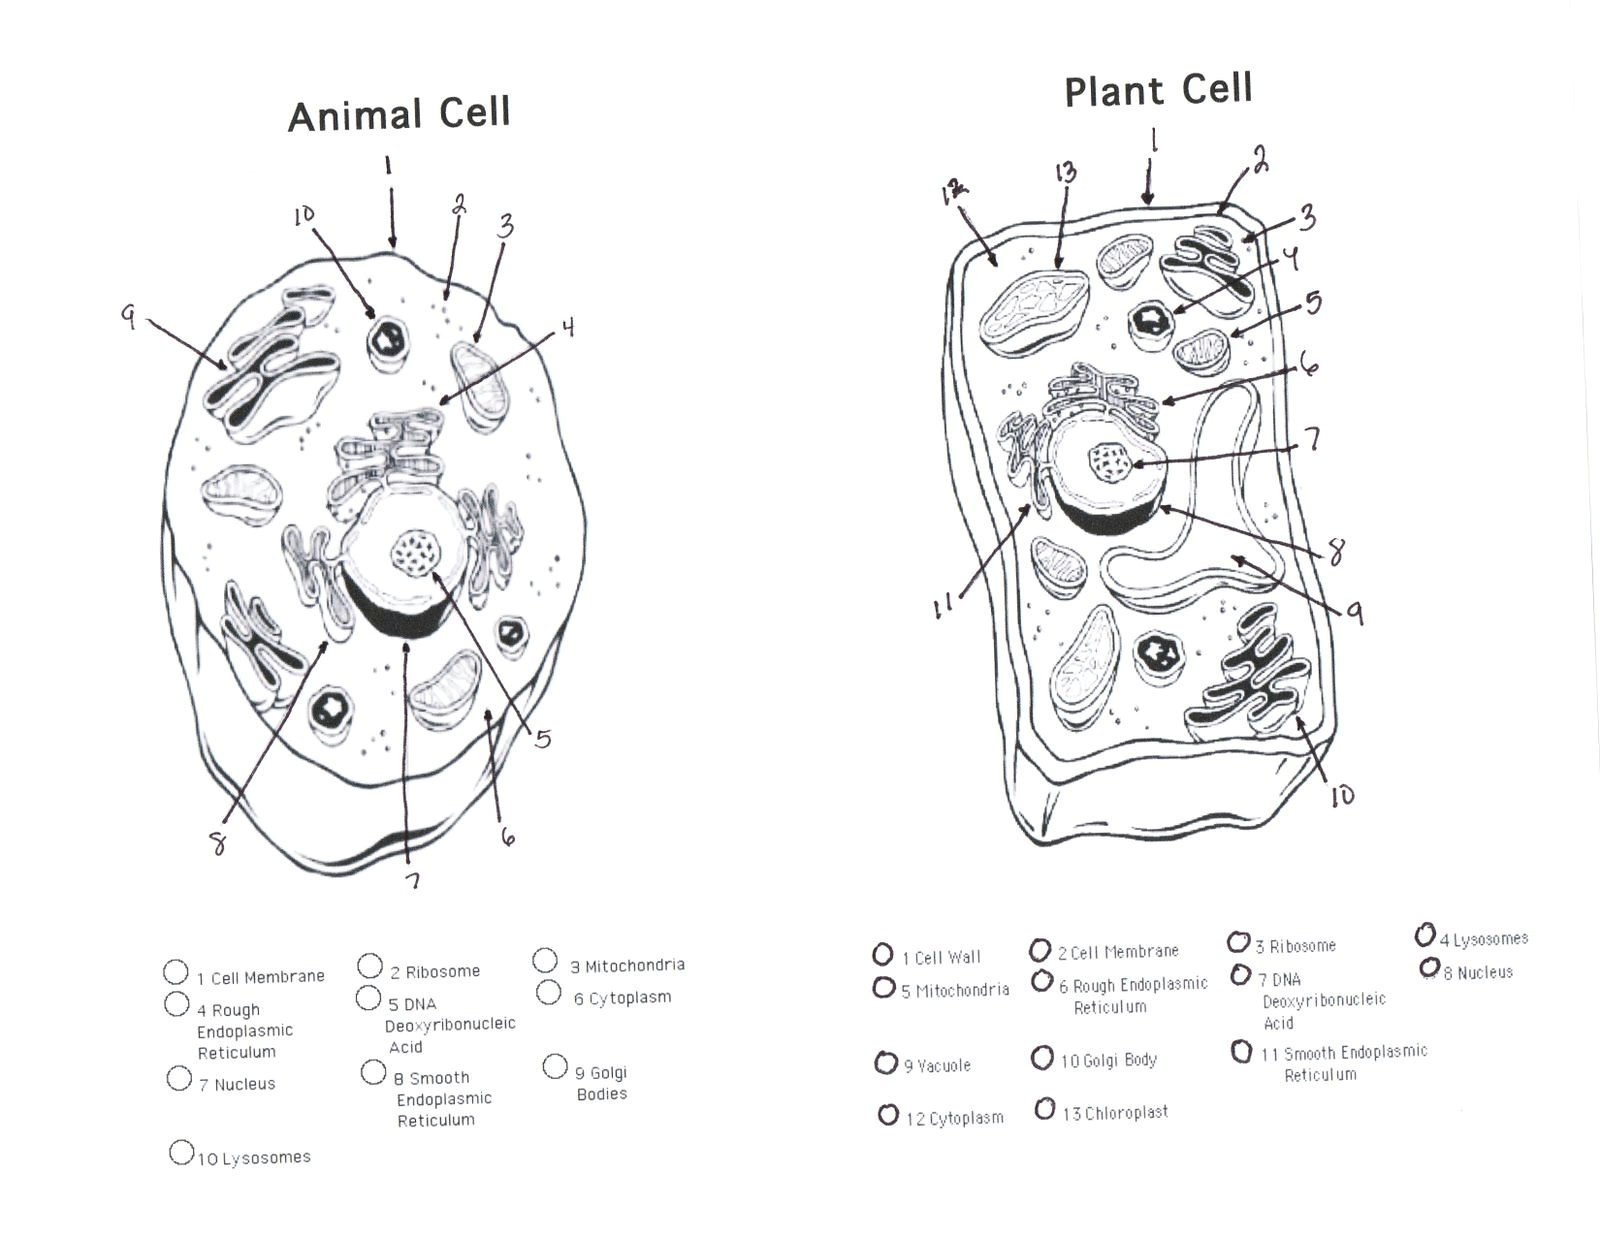 Plant Cell Drawing Easy Plant and Animal Cell Diagram Unlabeled Printable Diagram